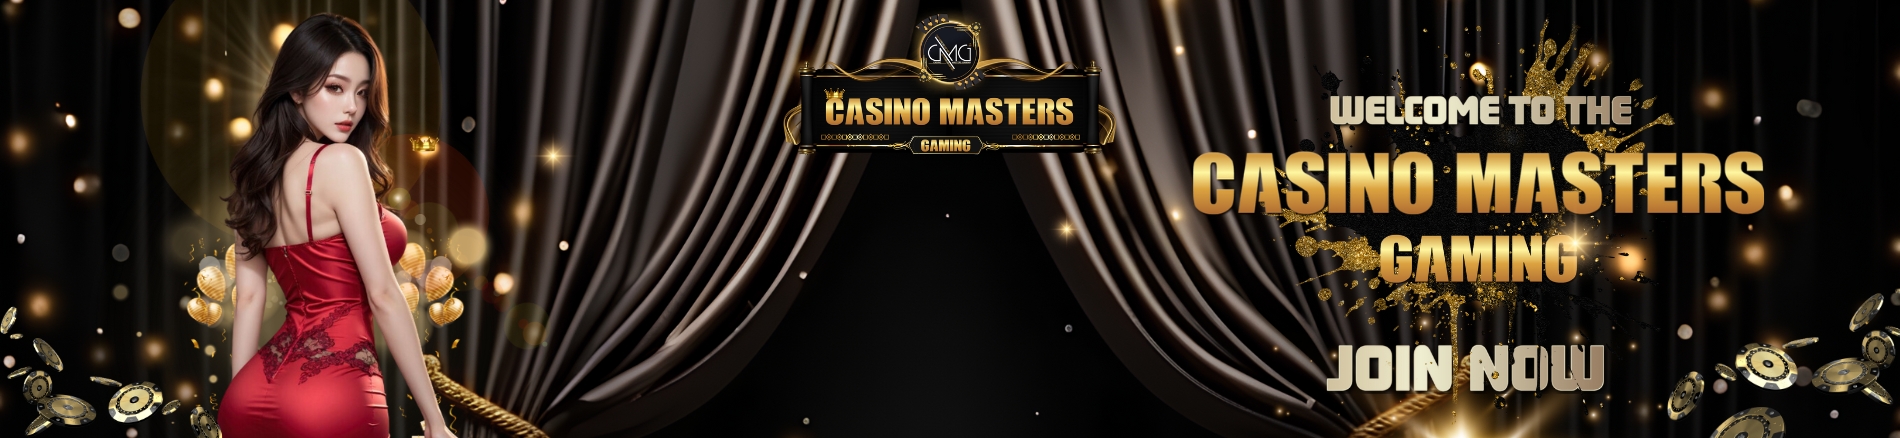 welcome-to-cmg_casino-masters-gaming_banner